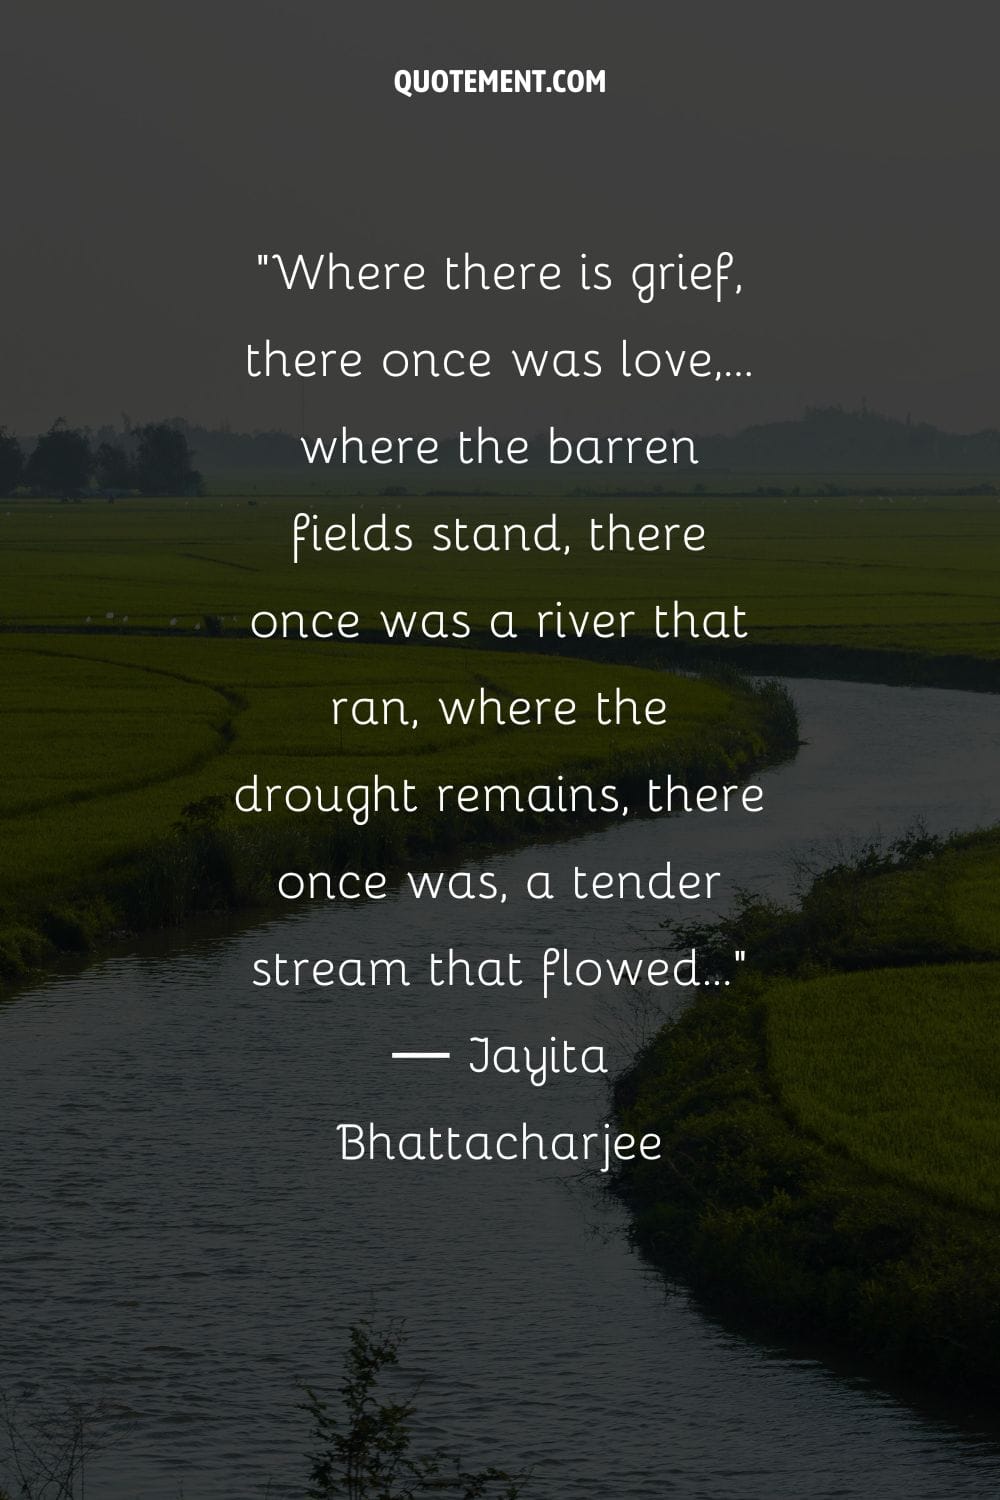 Idyllic river oasis in a green embrace representing river quote